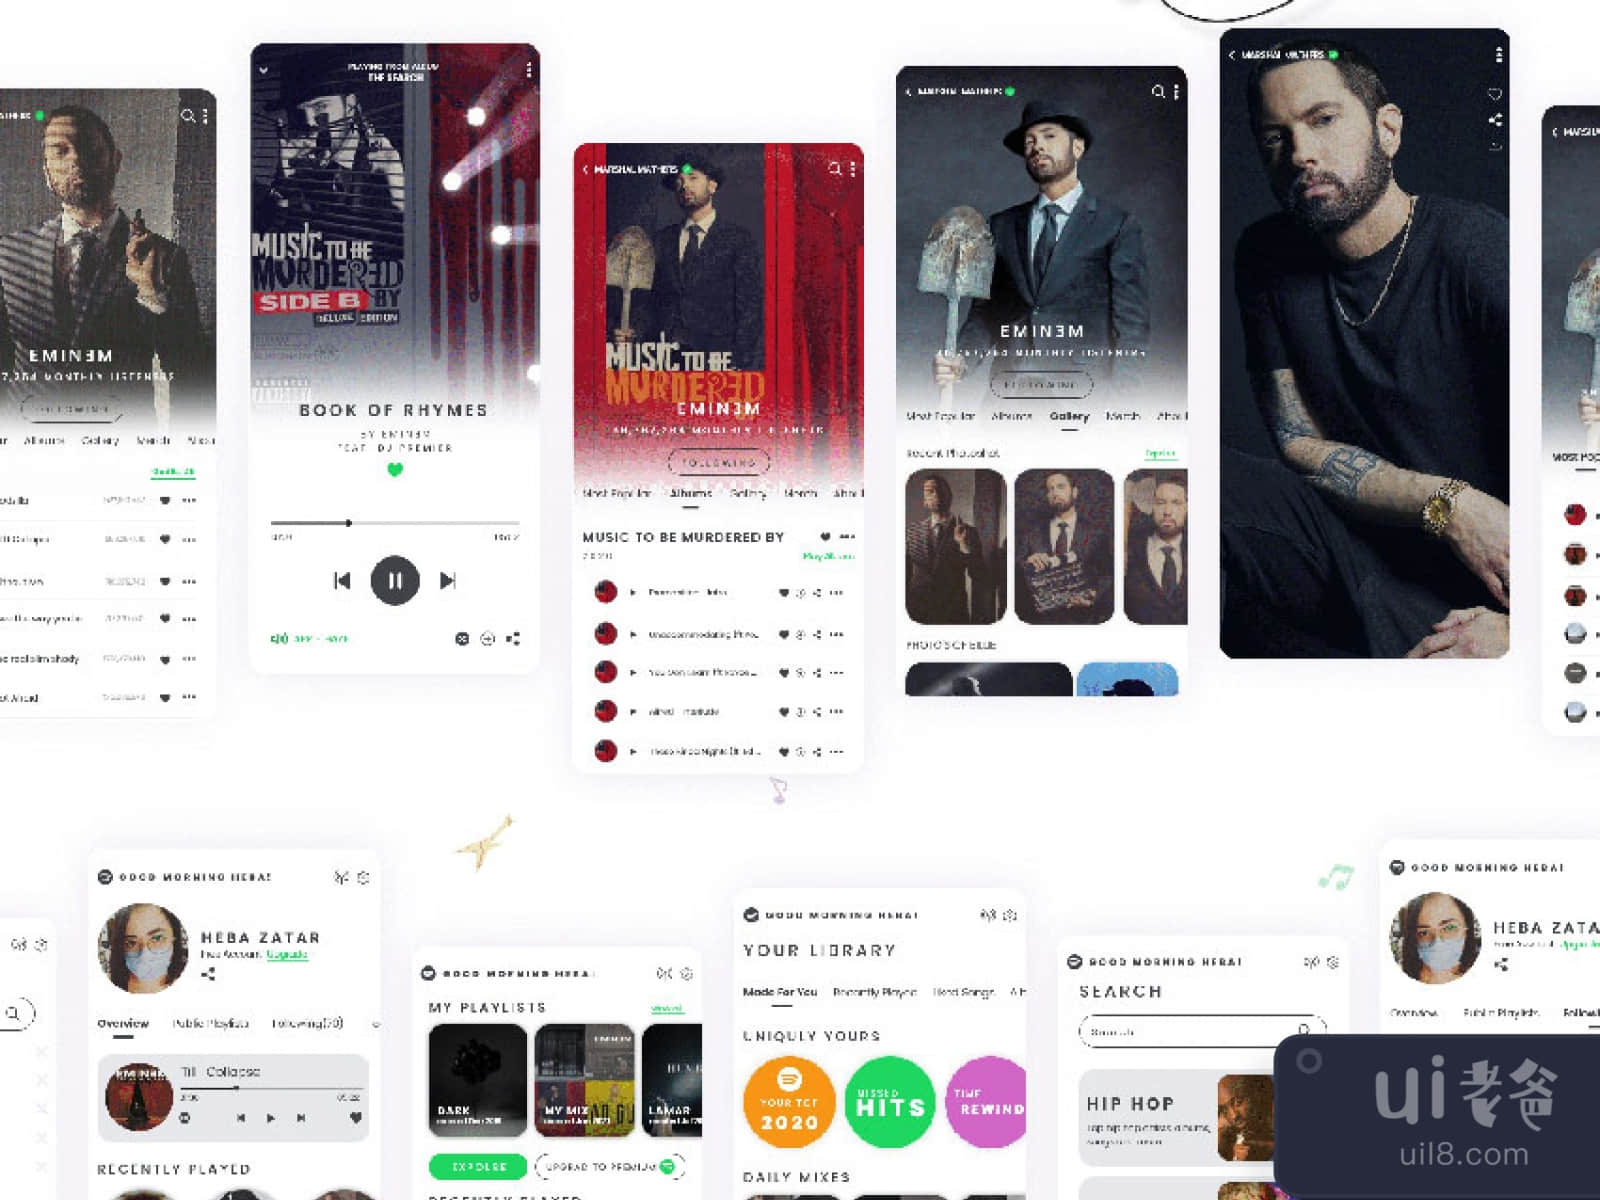 Spotify App Redesign for Figma and Adobe XD No 1